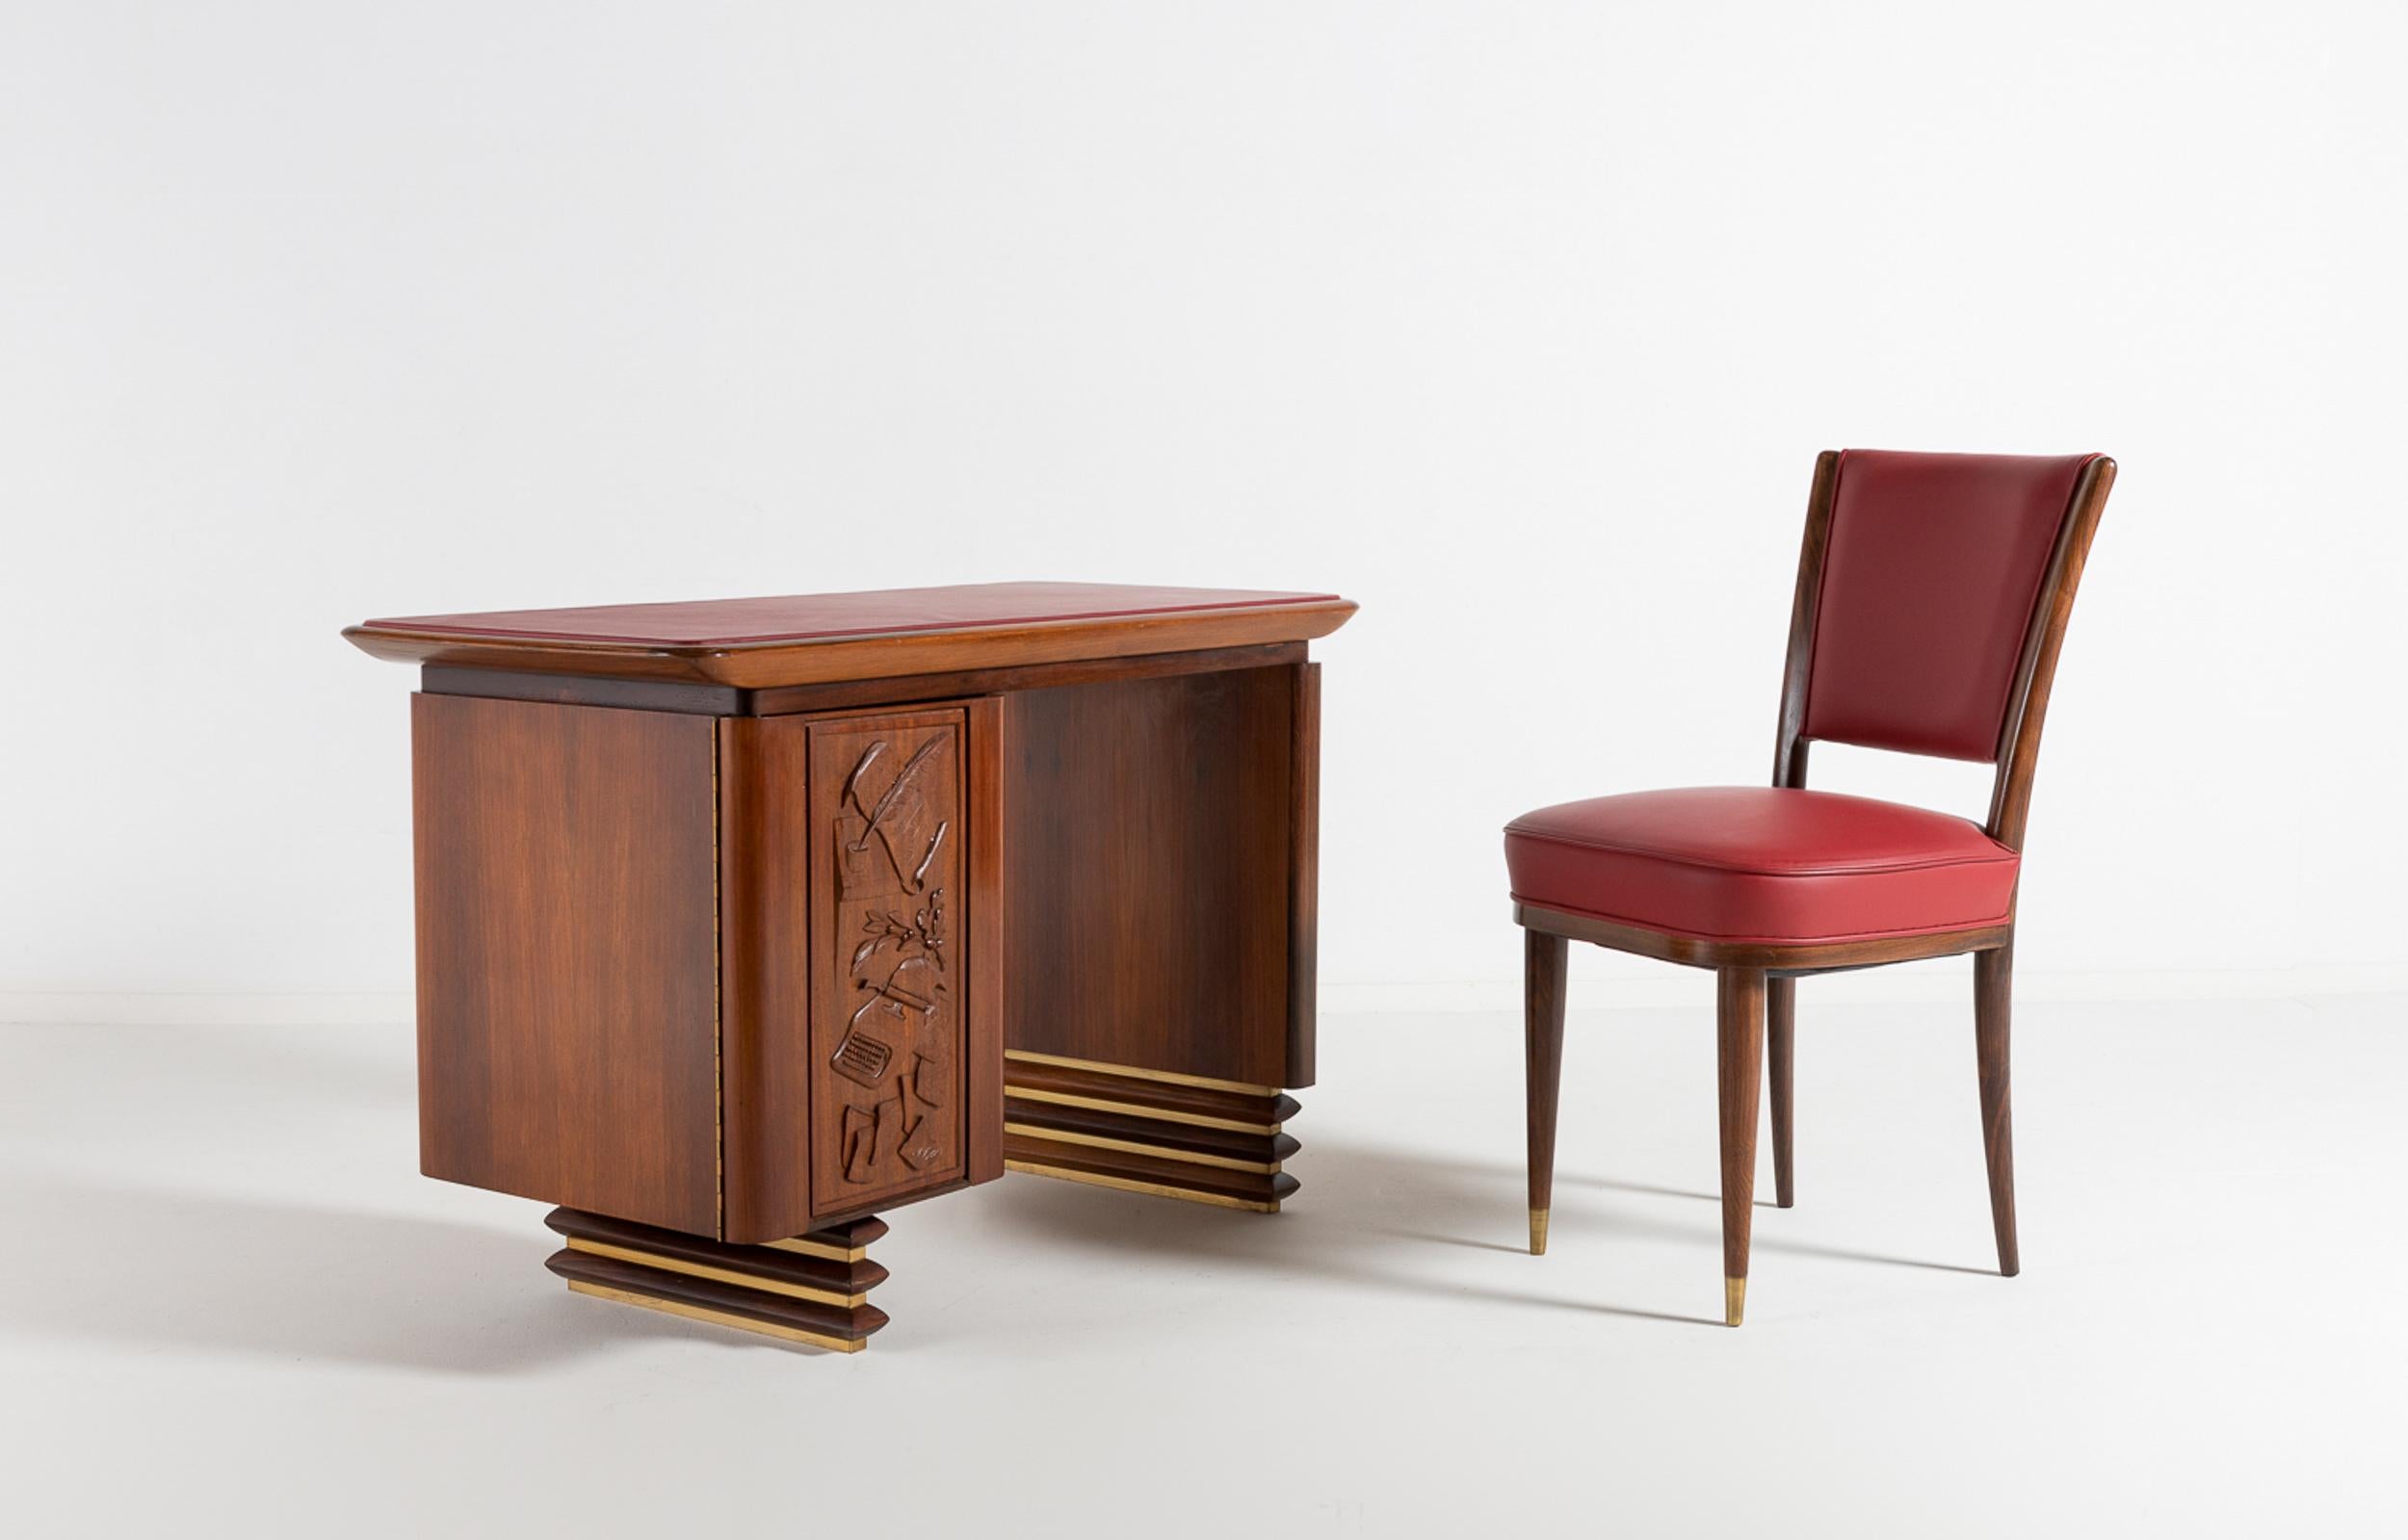 A superb Italian walnut and rosewood desk with matching rosewood and leather side chair, made to measure for the villa of an Italian executive in 1960. The rectangular top is covered with the original red leather. The front of the hidden drawer unit